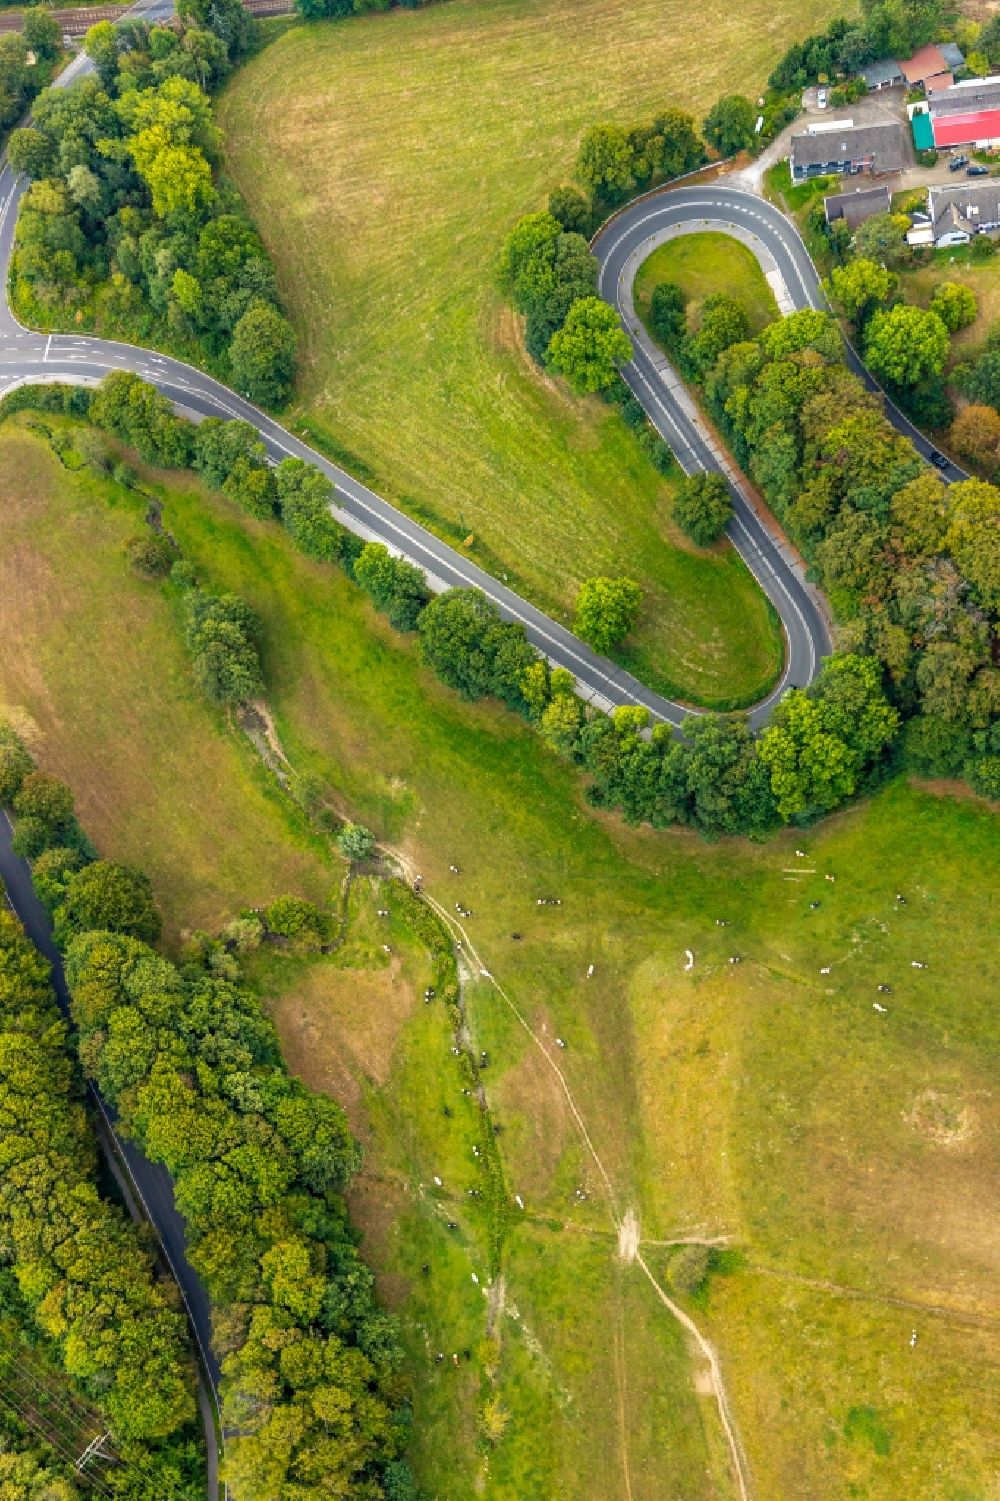 Aerial photograph Velbert - Serpentine-shaped curve of a road guide of Kuhlendahler Strasse in the district Neviges in Velbert in the state North Rhine-Westphalia, Germany